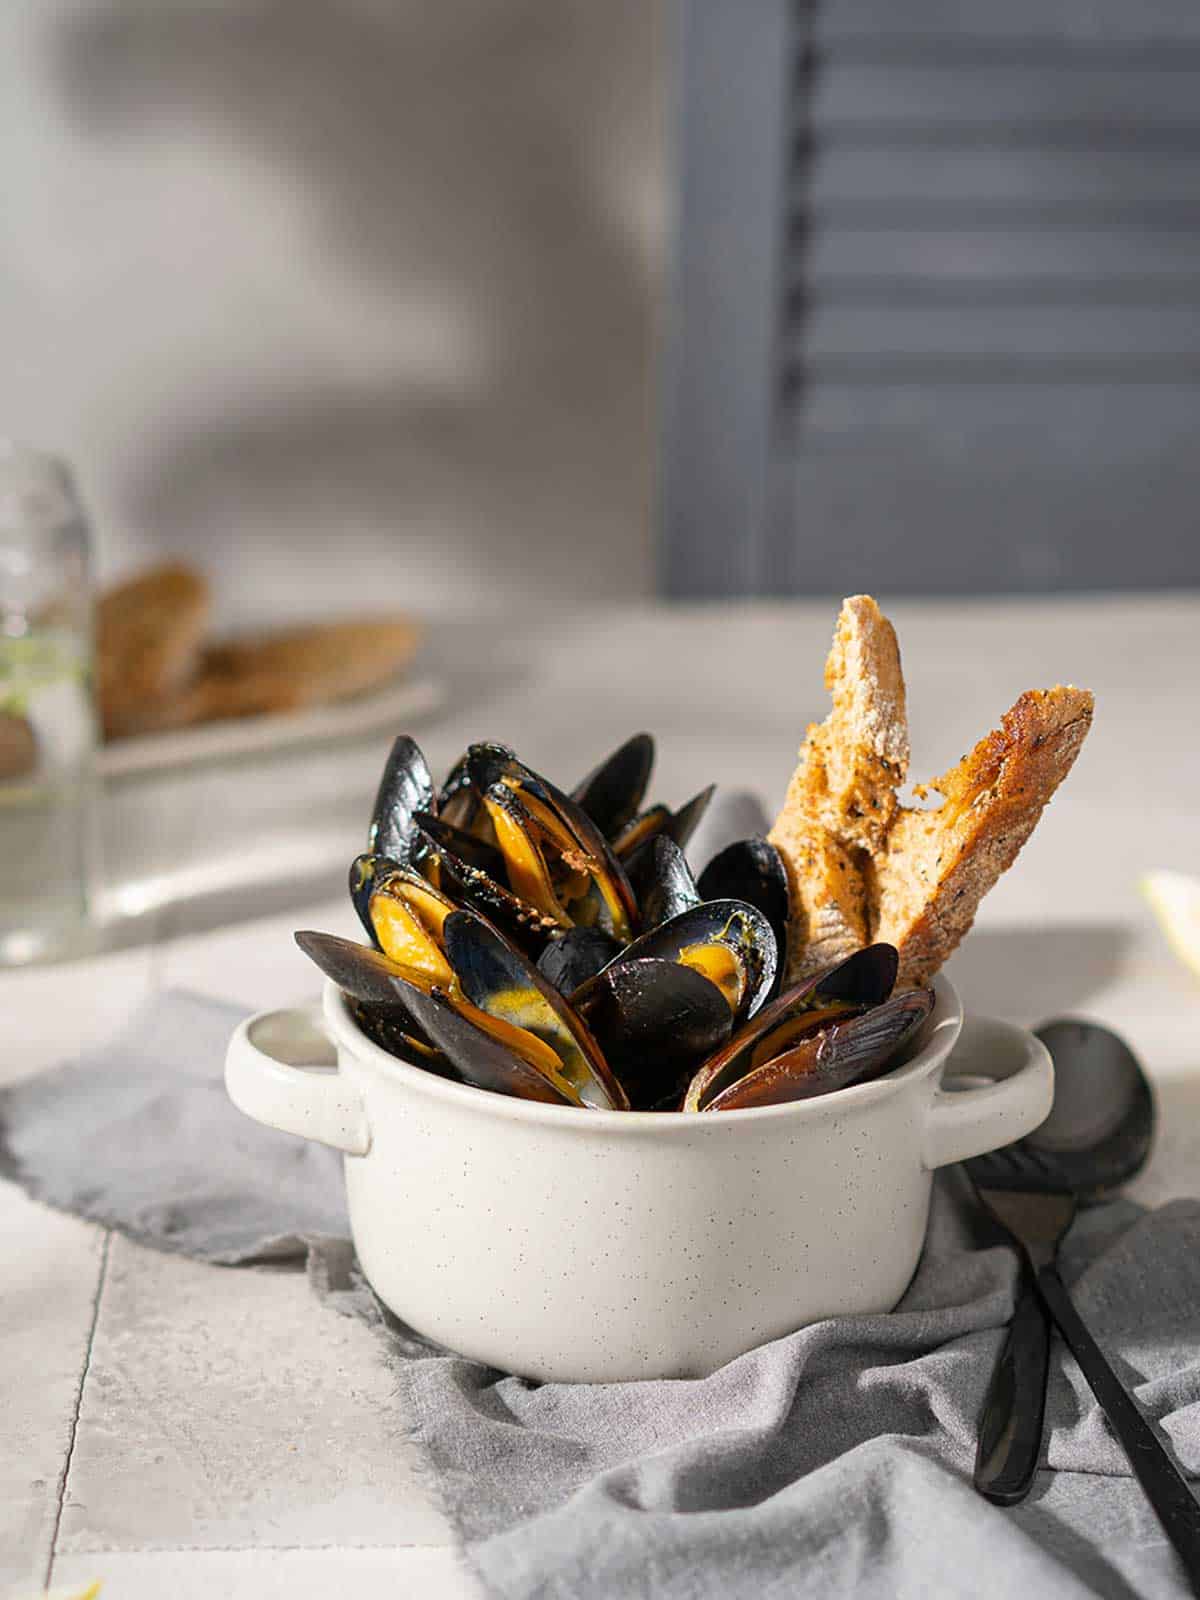 Steamed mussels and white wine saffron sauce in a white bowl with bread.